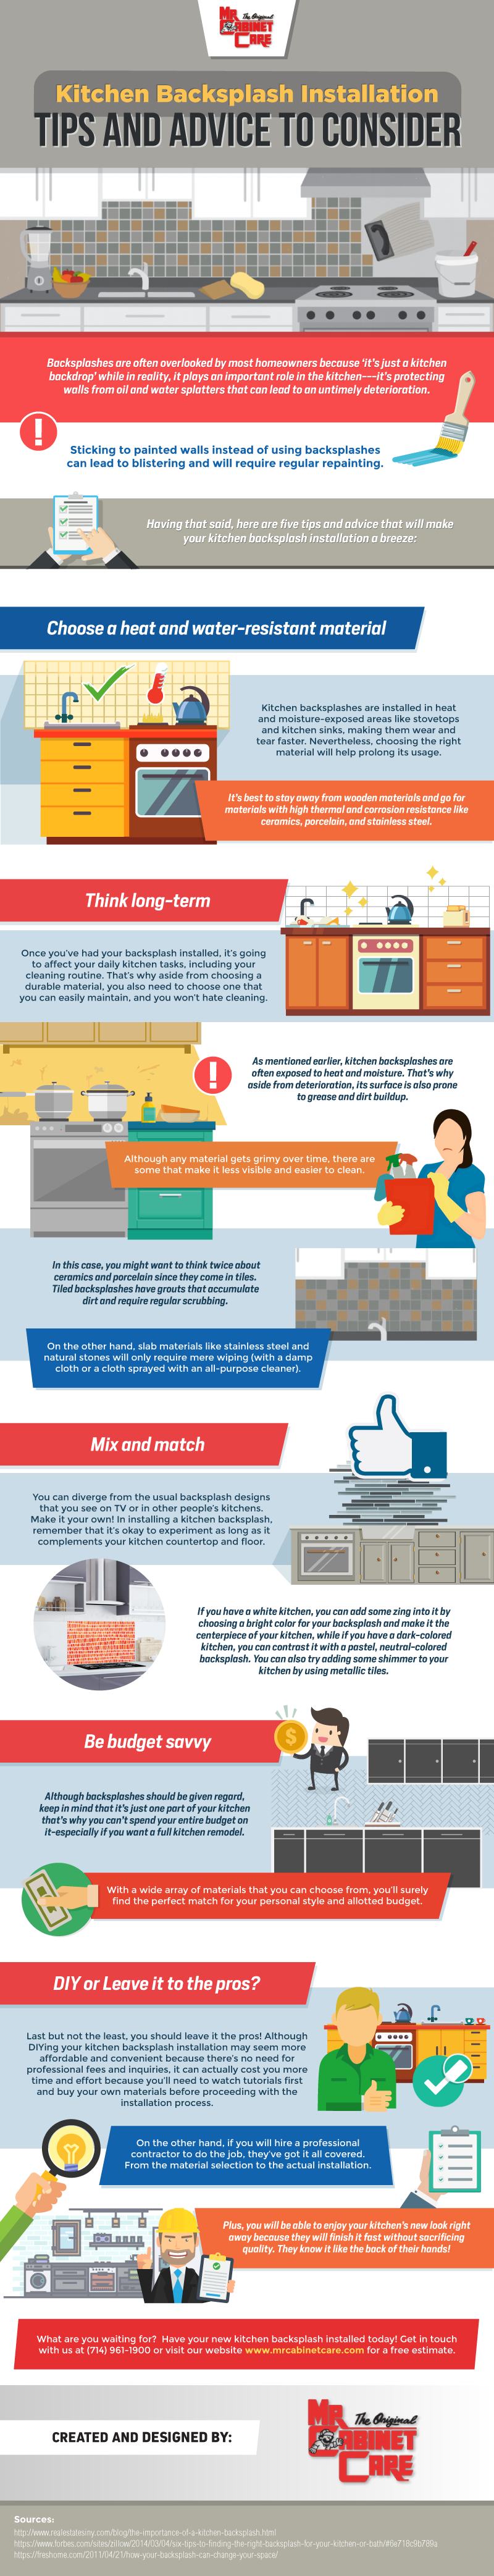 Kitchen Backsplash Installation- Tips and Advice to Consider (Infographic)